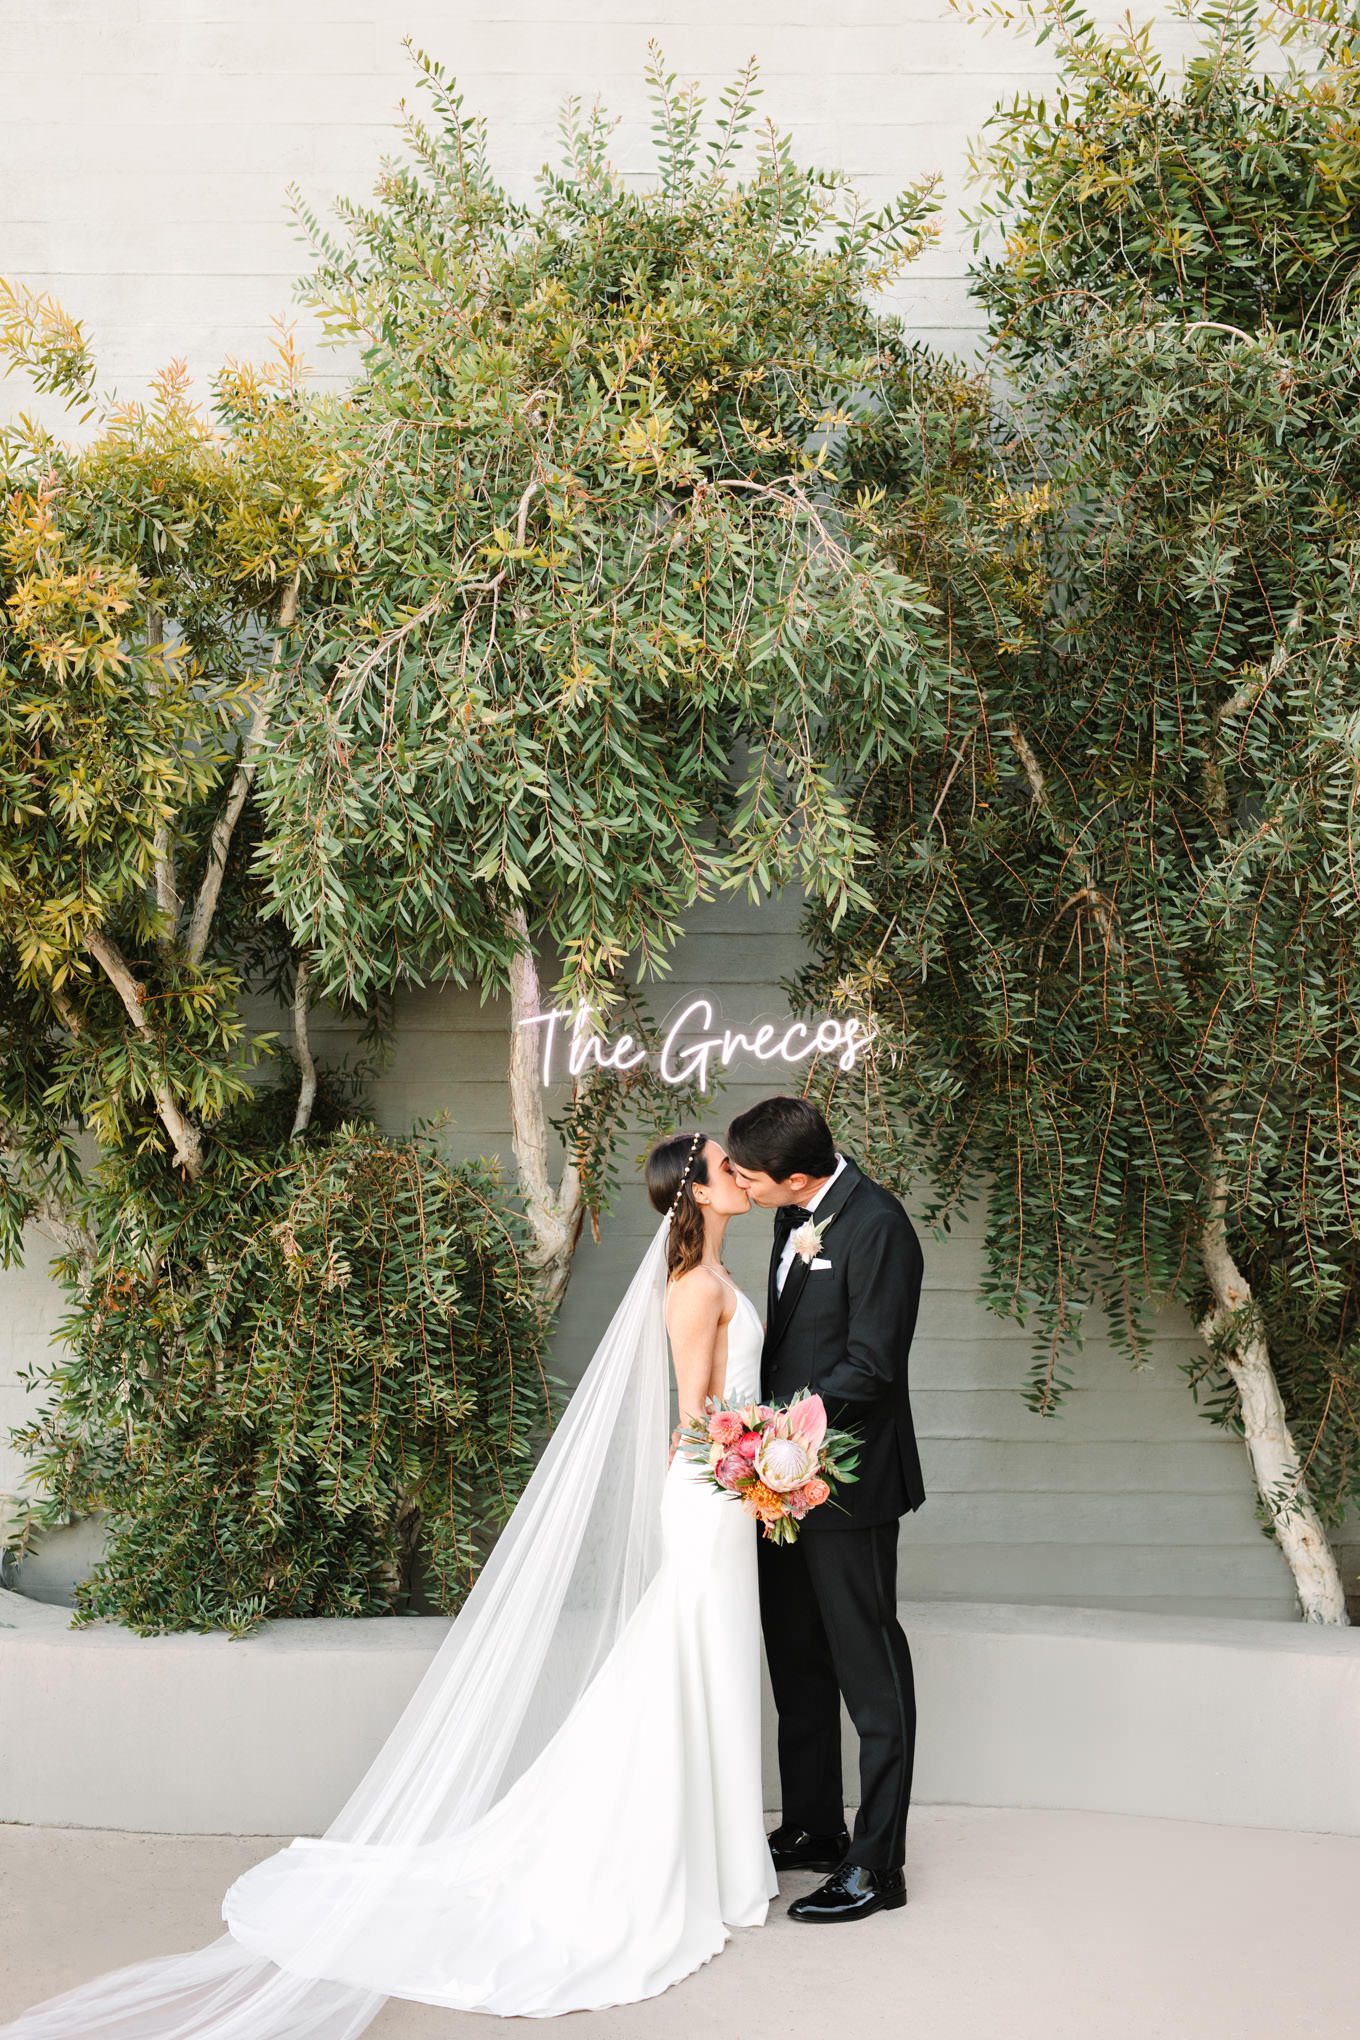 Bride and groom kissing in front of custom neon sign | Engagement, elopement, and wedding photography roundup of Mary Costa’s favorite images from 2020 | Colorful and elevated photography for fun-loving couples in Southern California | #2020wedding #elopement #weddingphoto #weddingphotography #microwedding   Source: Mary Costa Photography | Los Angeles